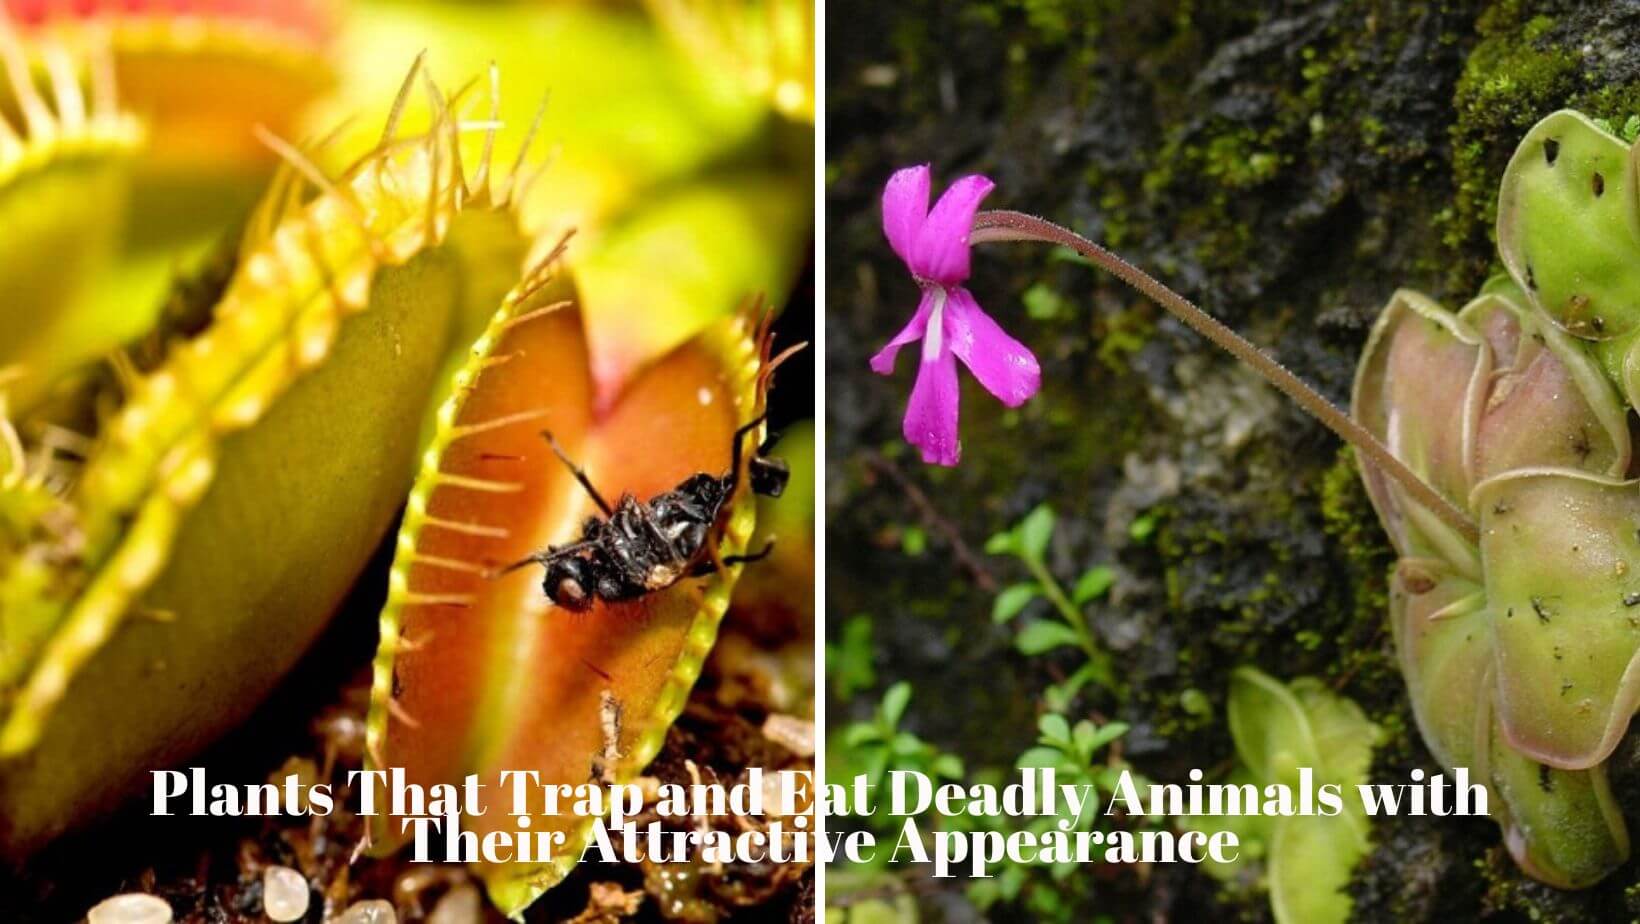 Plants That Trap and Eat Deadly Animals with Their Attractive Appearance